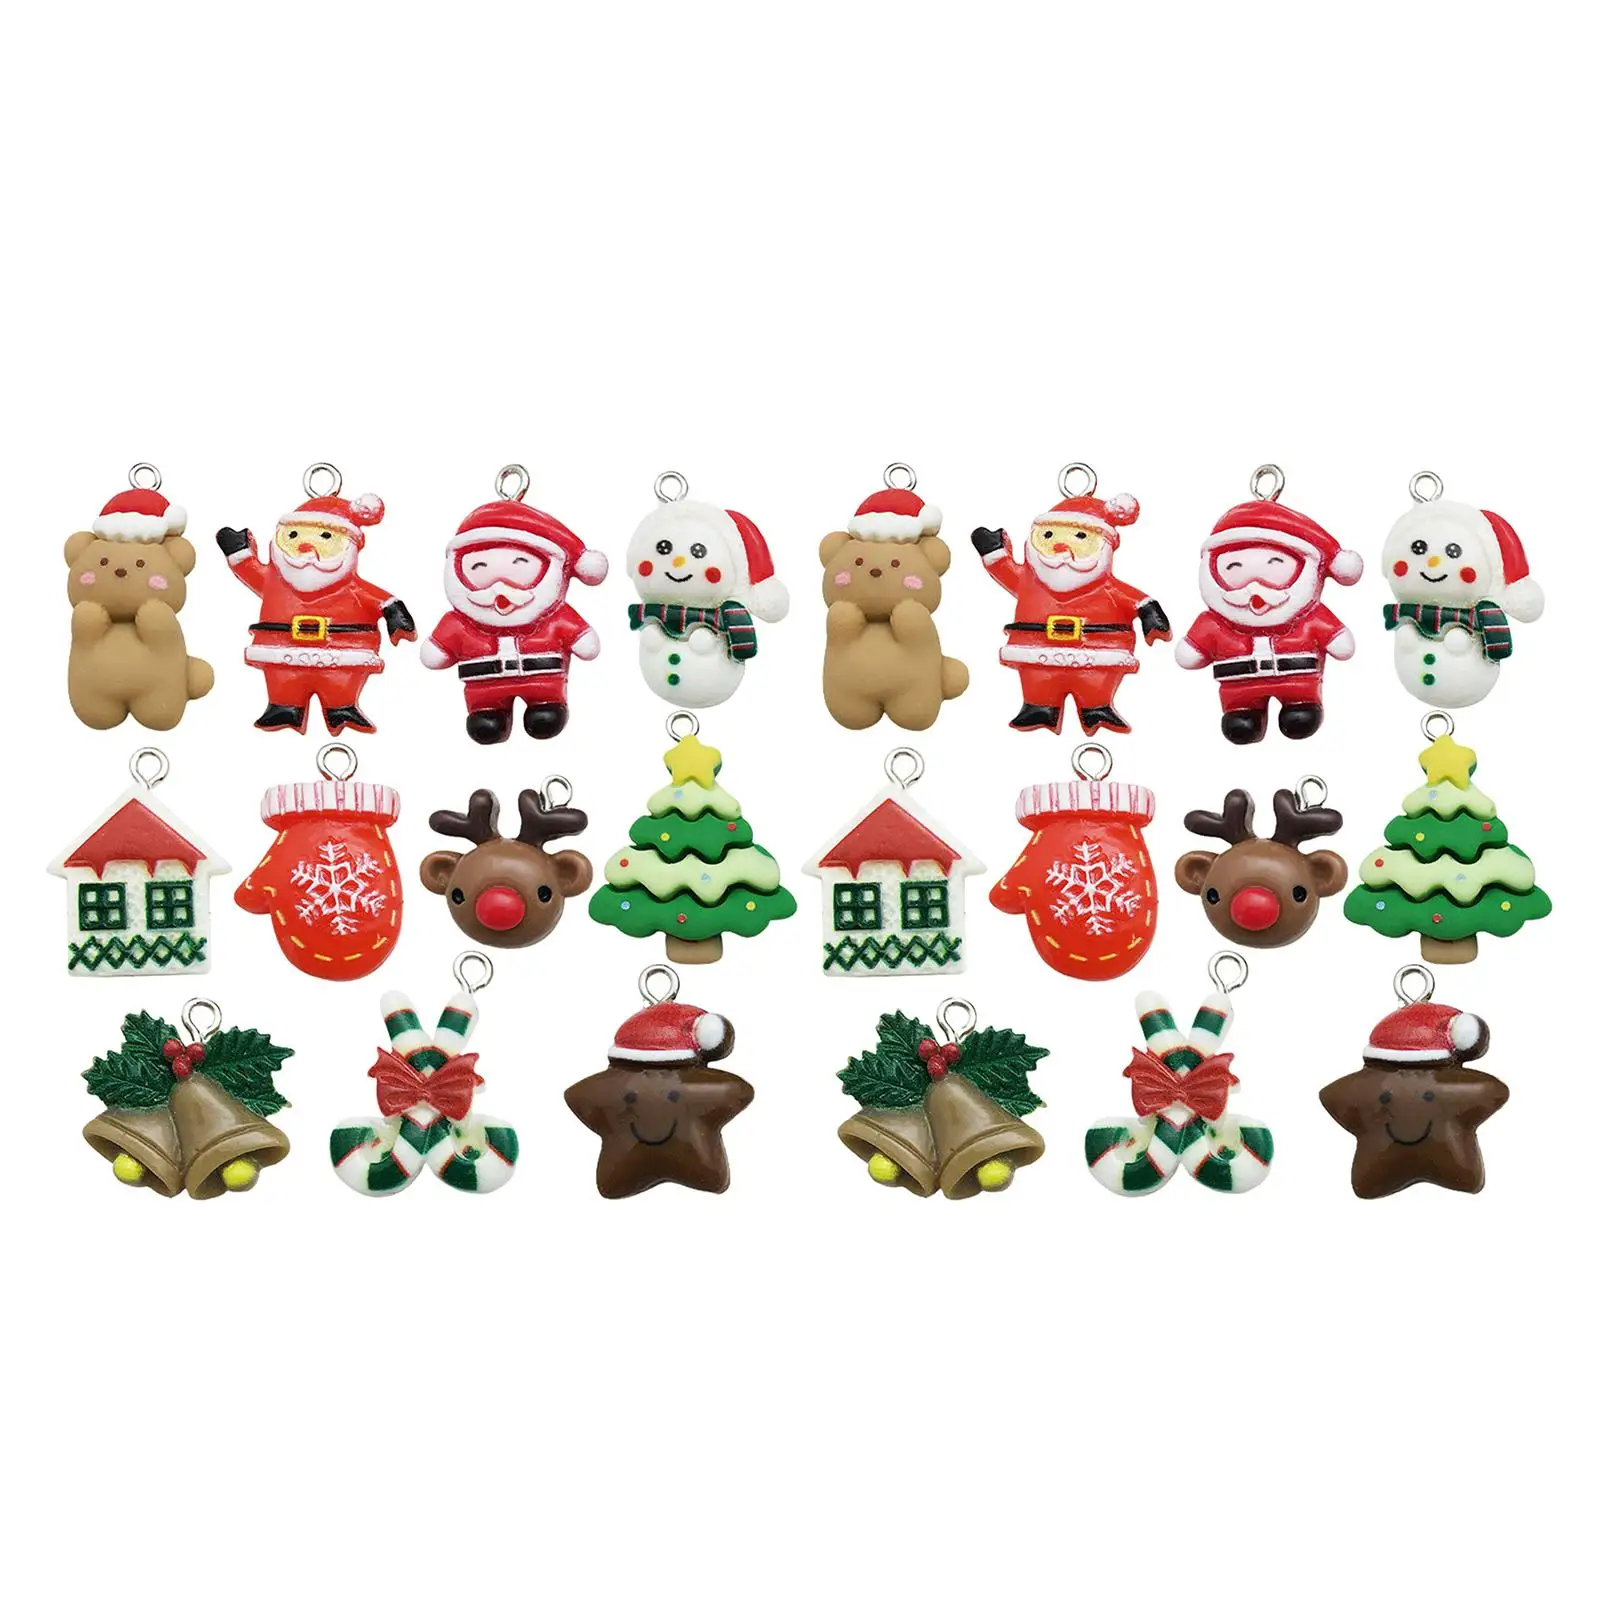 22x Christmas Pendants Assorted Christmas Charms Cute Birthday Gifts Crafts for Bracelets Keychain Jewelry Making Necklaces Home